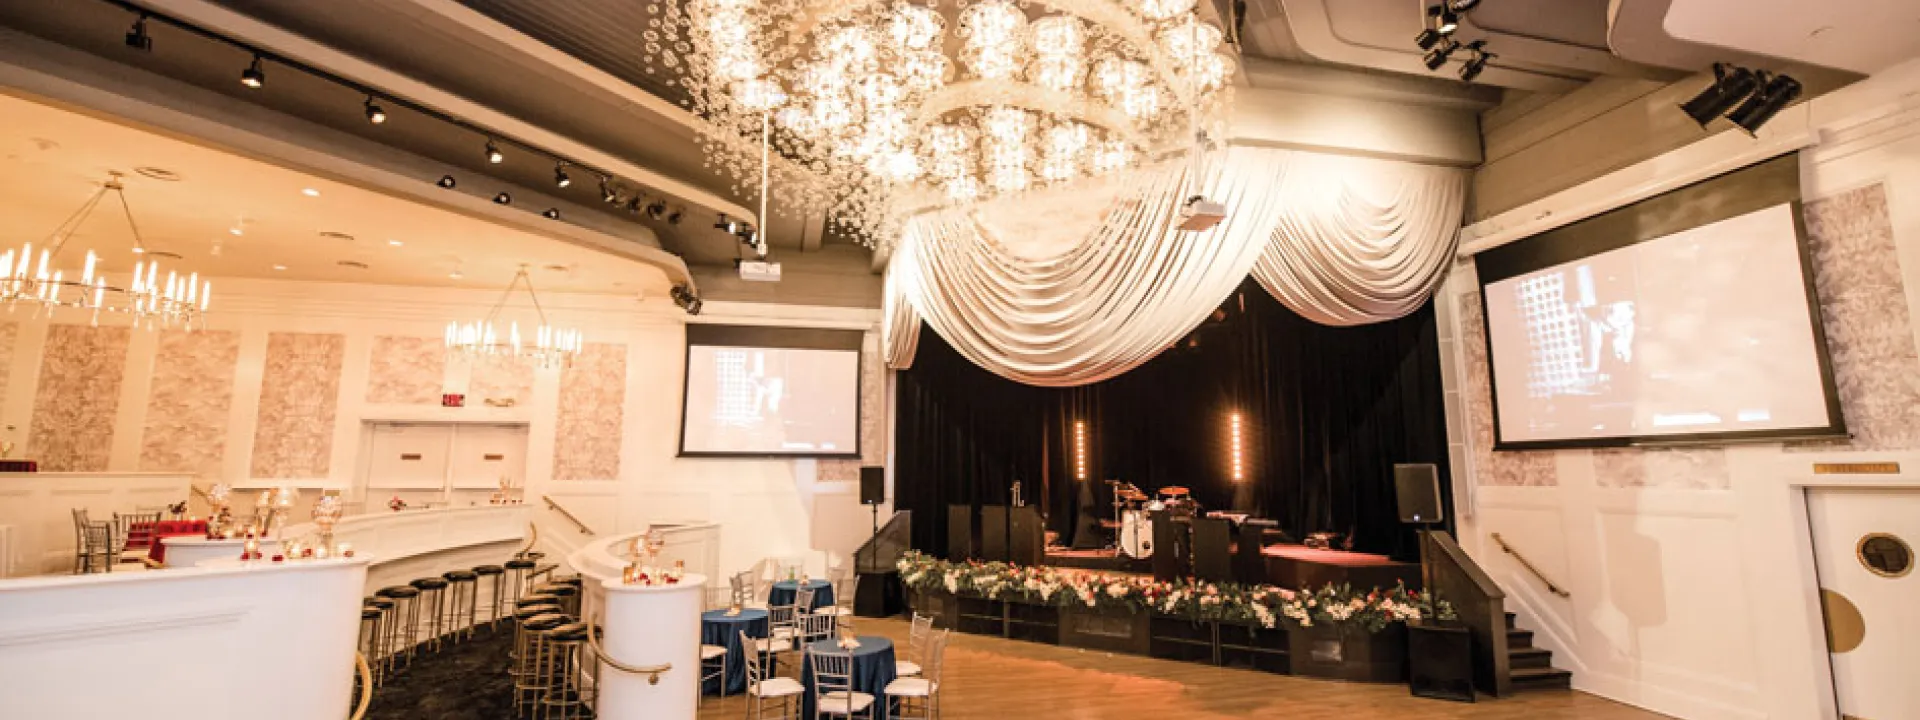 The glittering space at Metropolitan Ballroom & Clubroom, inspired by dance scenes between Ginger Rogers and Fred Astaire.